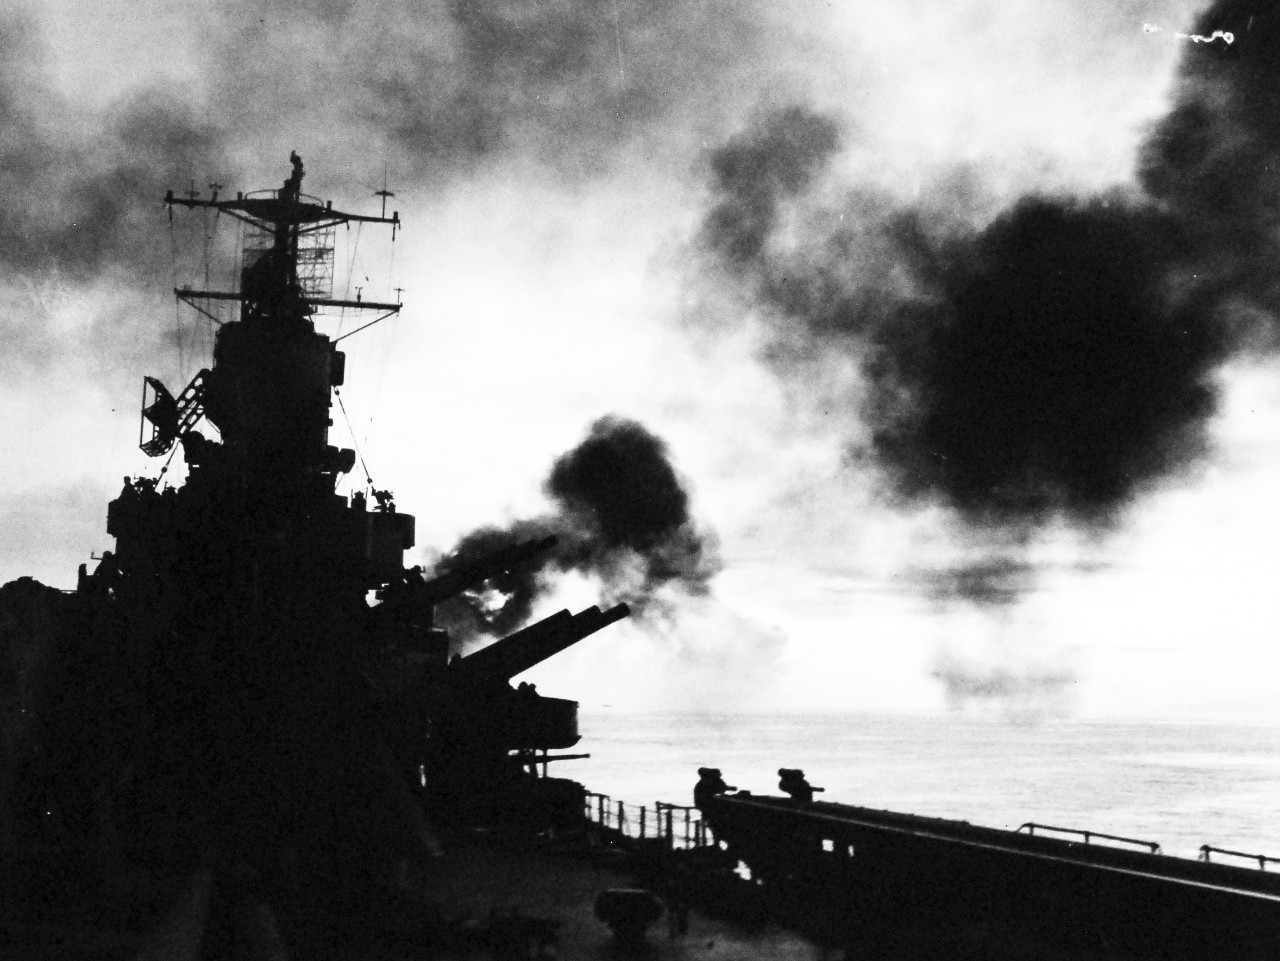 80-G-57445:  Battle of Cape Gloucester, New Britain, December 1943-January 1944.    Bombardment of Cape Gloucester, New Britain, by USS Phoenix (CL-46) and other ships of the Task Force.  Taken by USS Nashville (CL-43), December 24-26 1943. Official U.S. Navy Photograph, now in the collection of National Archives (2015/6/2).